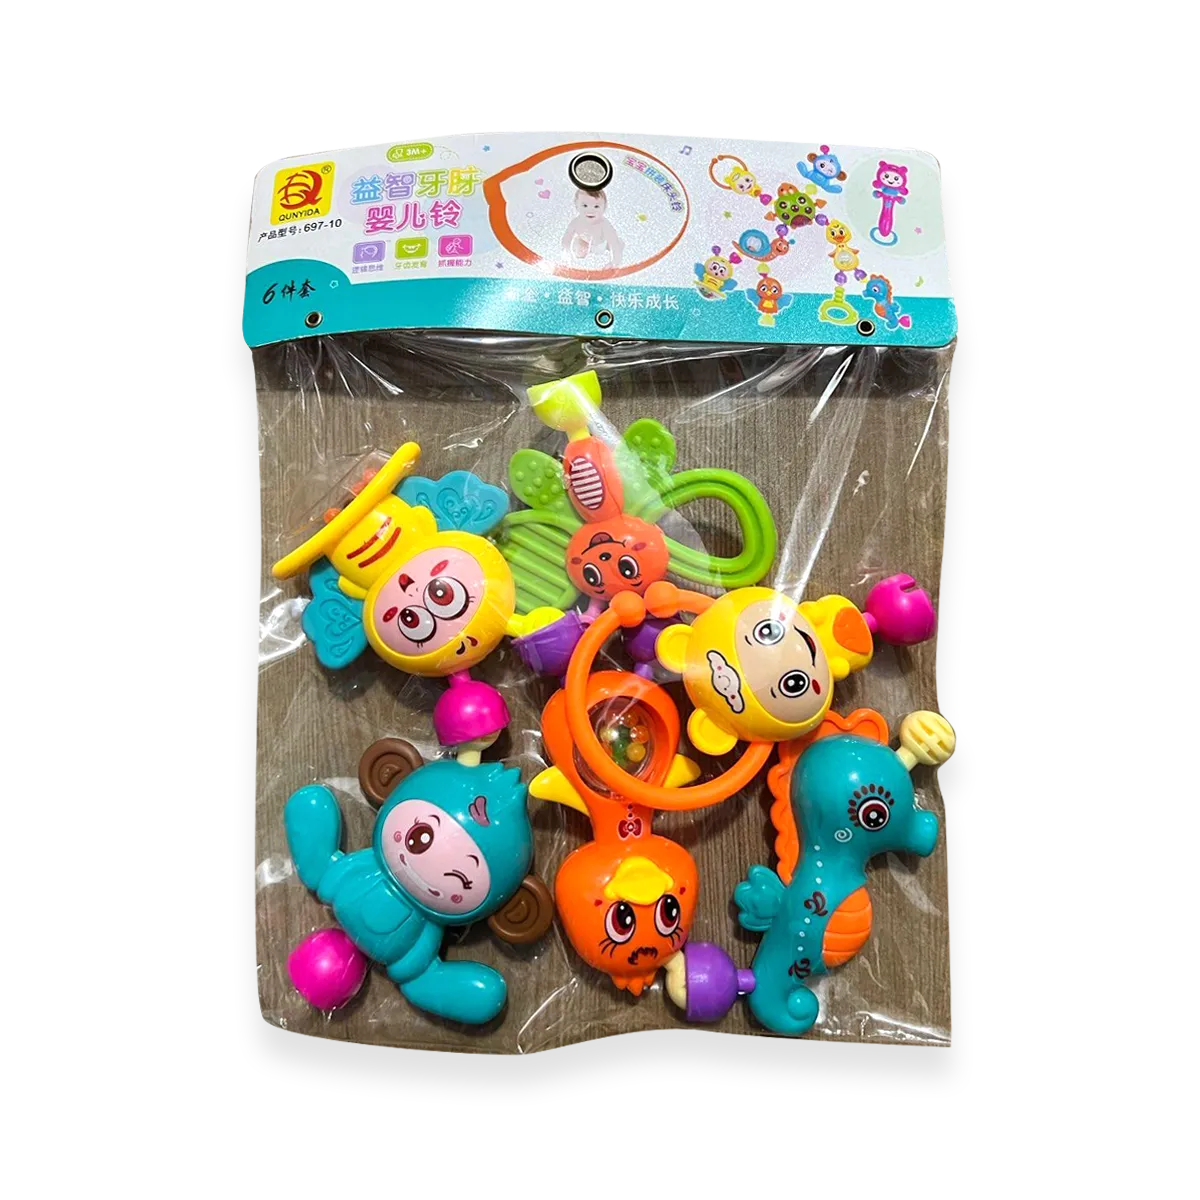 Baby Cute Rattle Toy